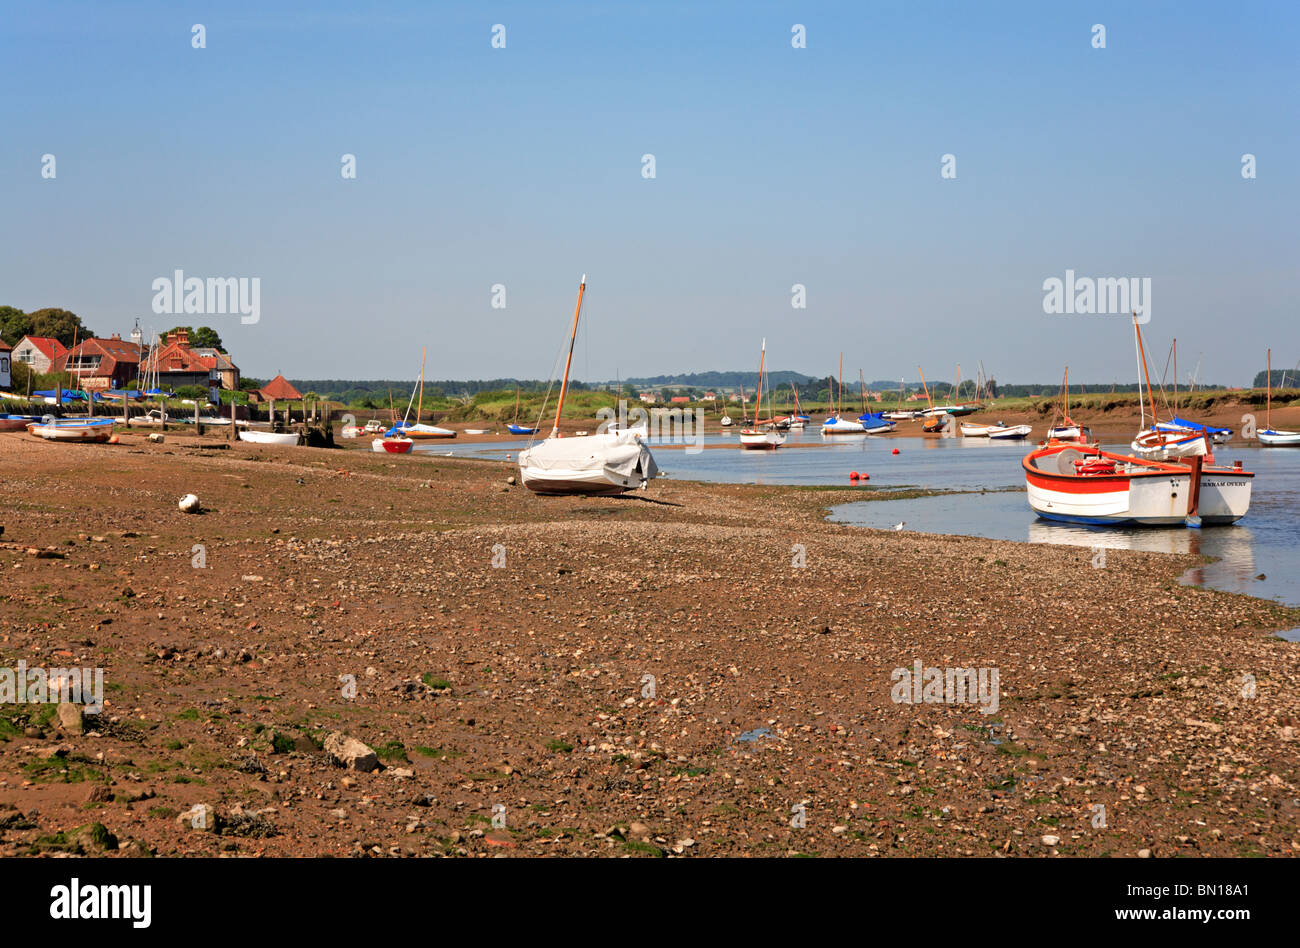 Boats beached at low tide at Burnham Overy Staithe, Norfolk, England, United Kingdom. Stock Photo